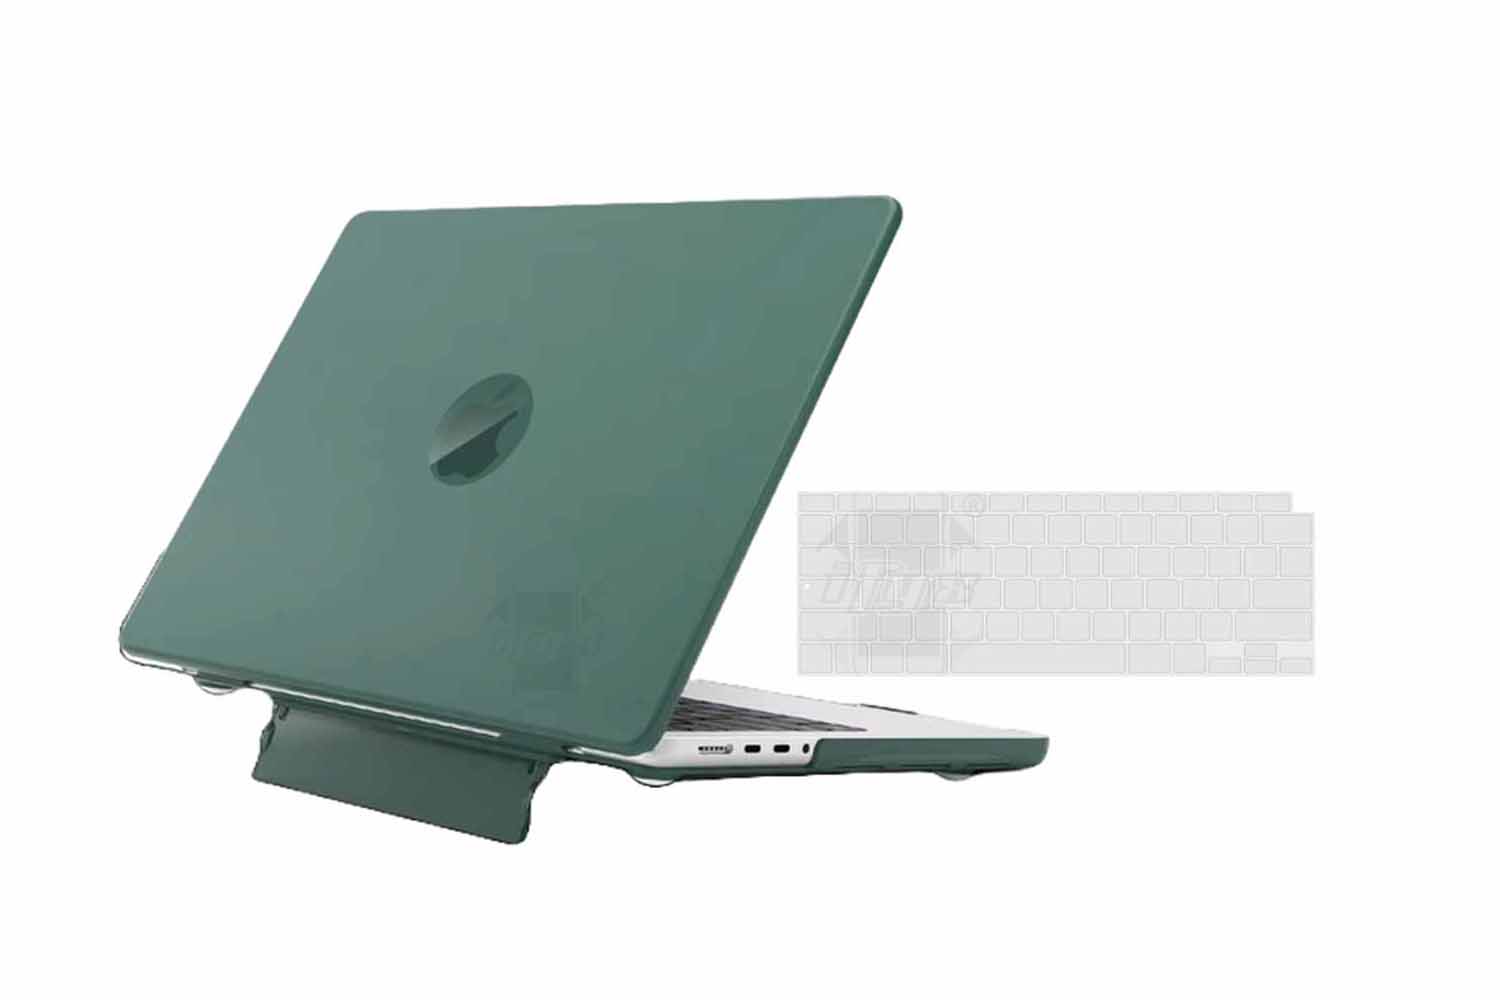 Anti-Fingerprint Case Cover for Macbook Air 13 inch M1 A2337 / A2179 Touch ID 2020-2021 with Folding Stand (Dark Green)